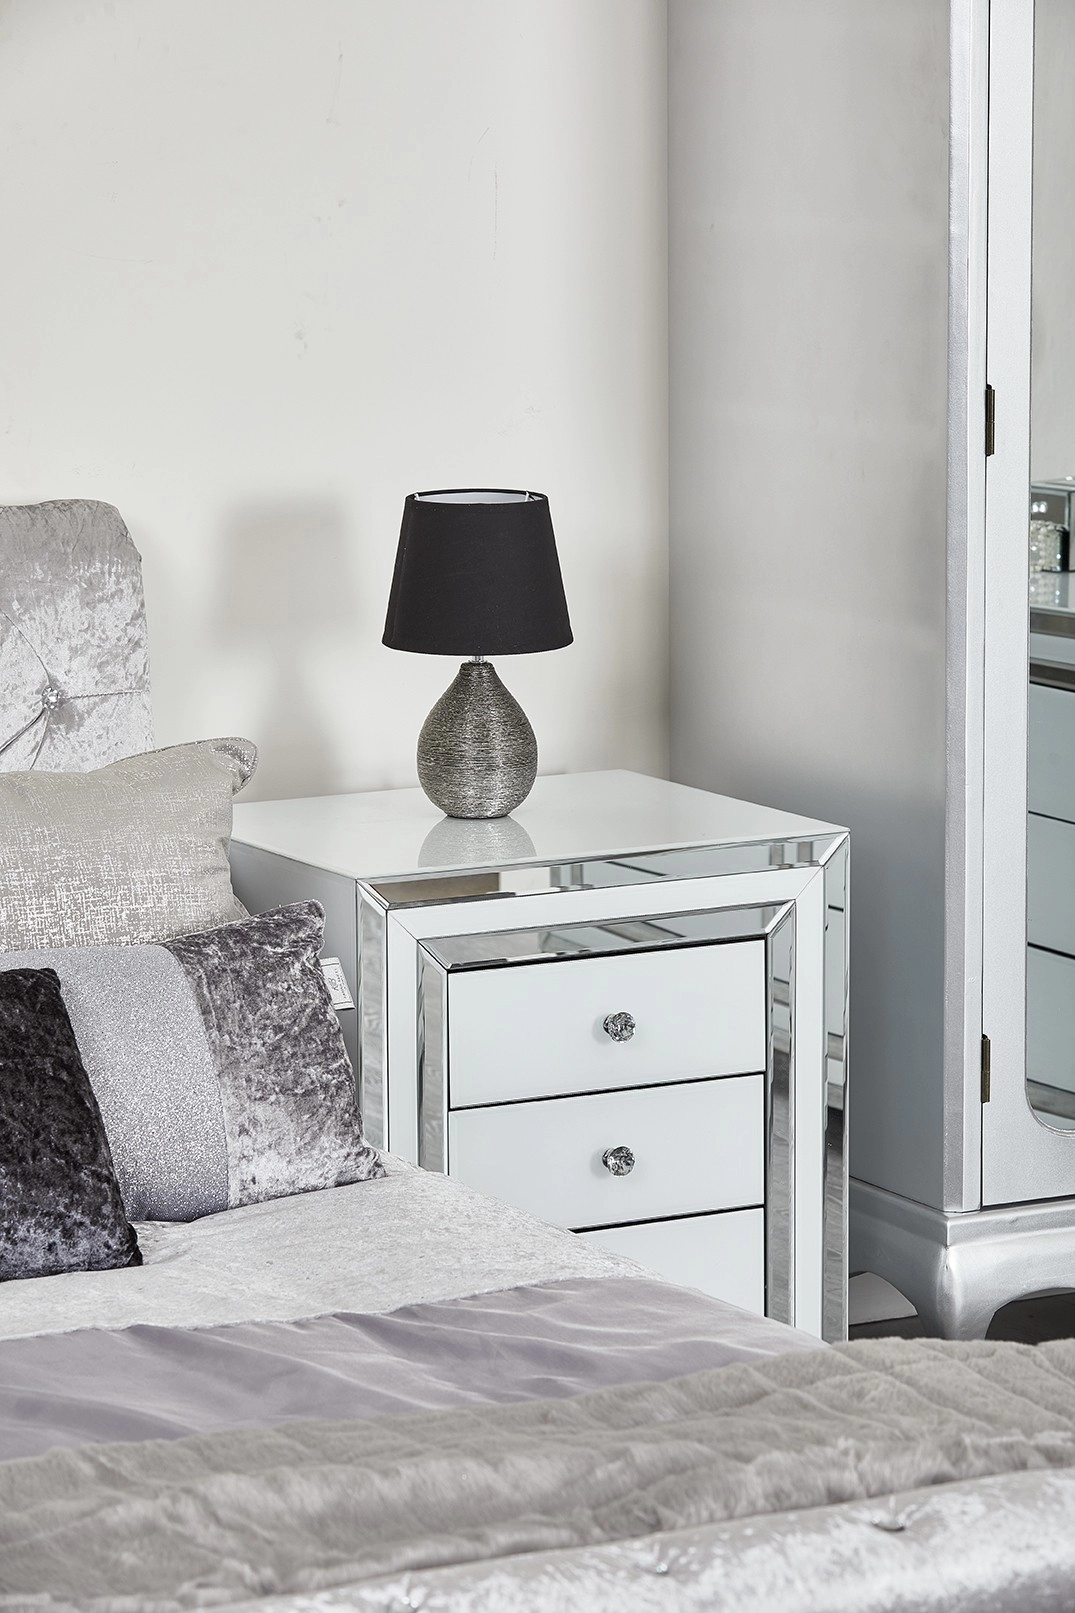 Crystal Bedroom Furniture Mirrored Nightstand With Drawer